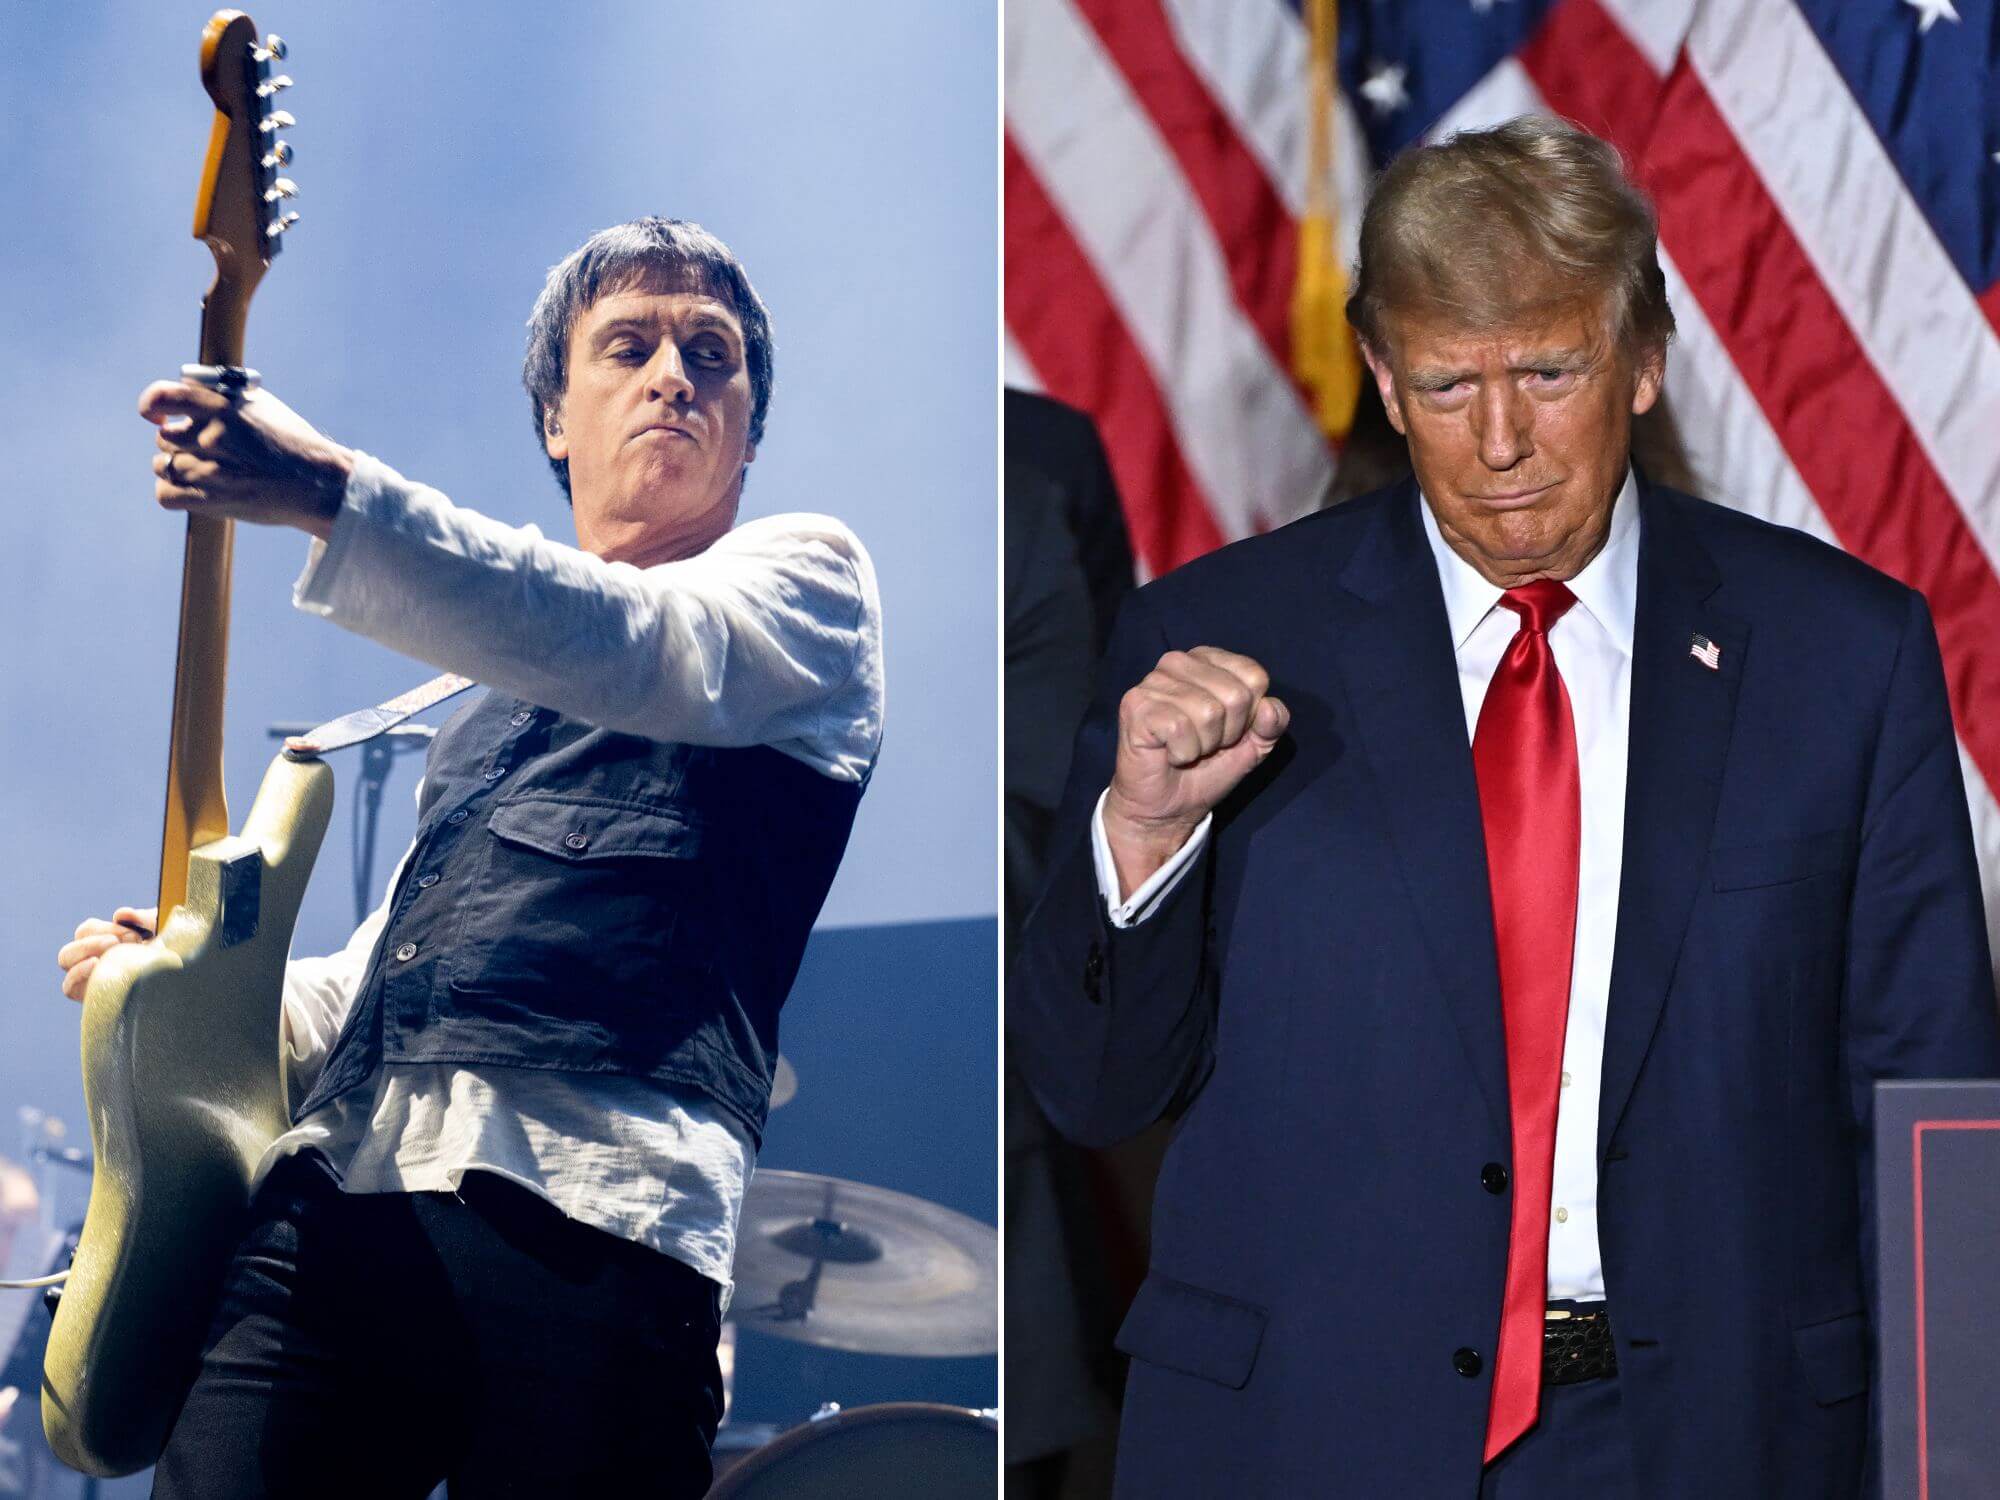 Johnny Marr of The Smiths and Donald Trump